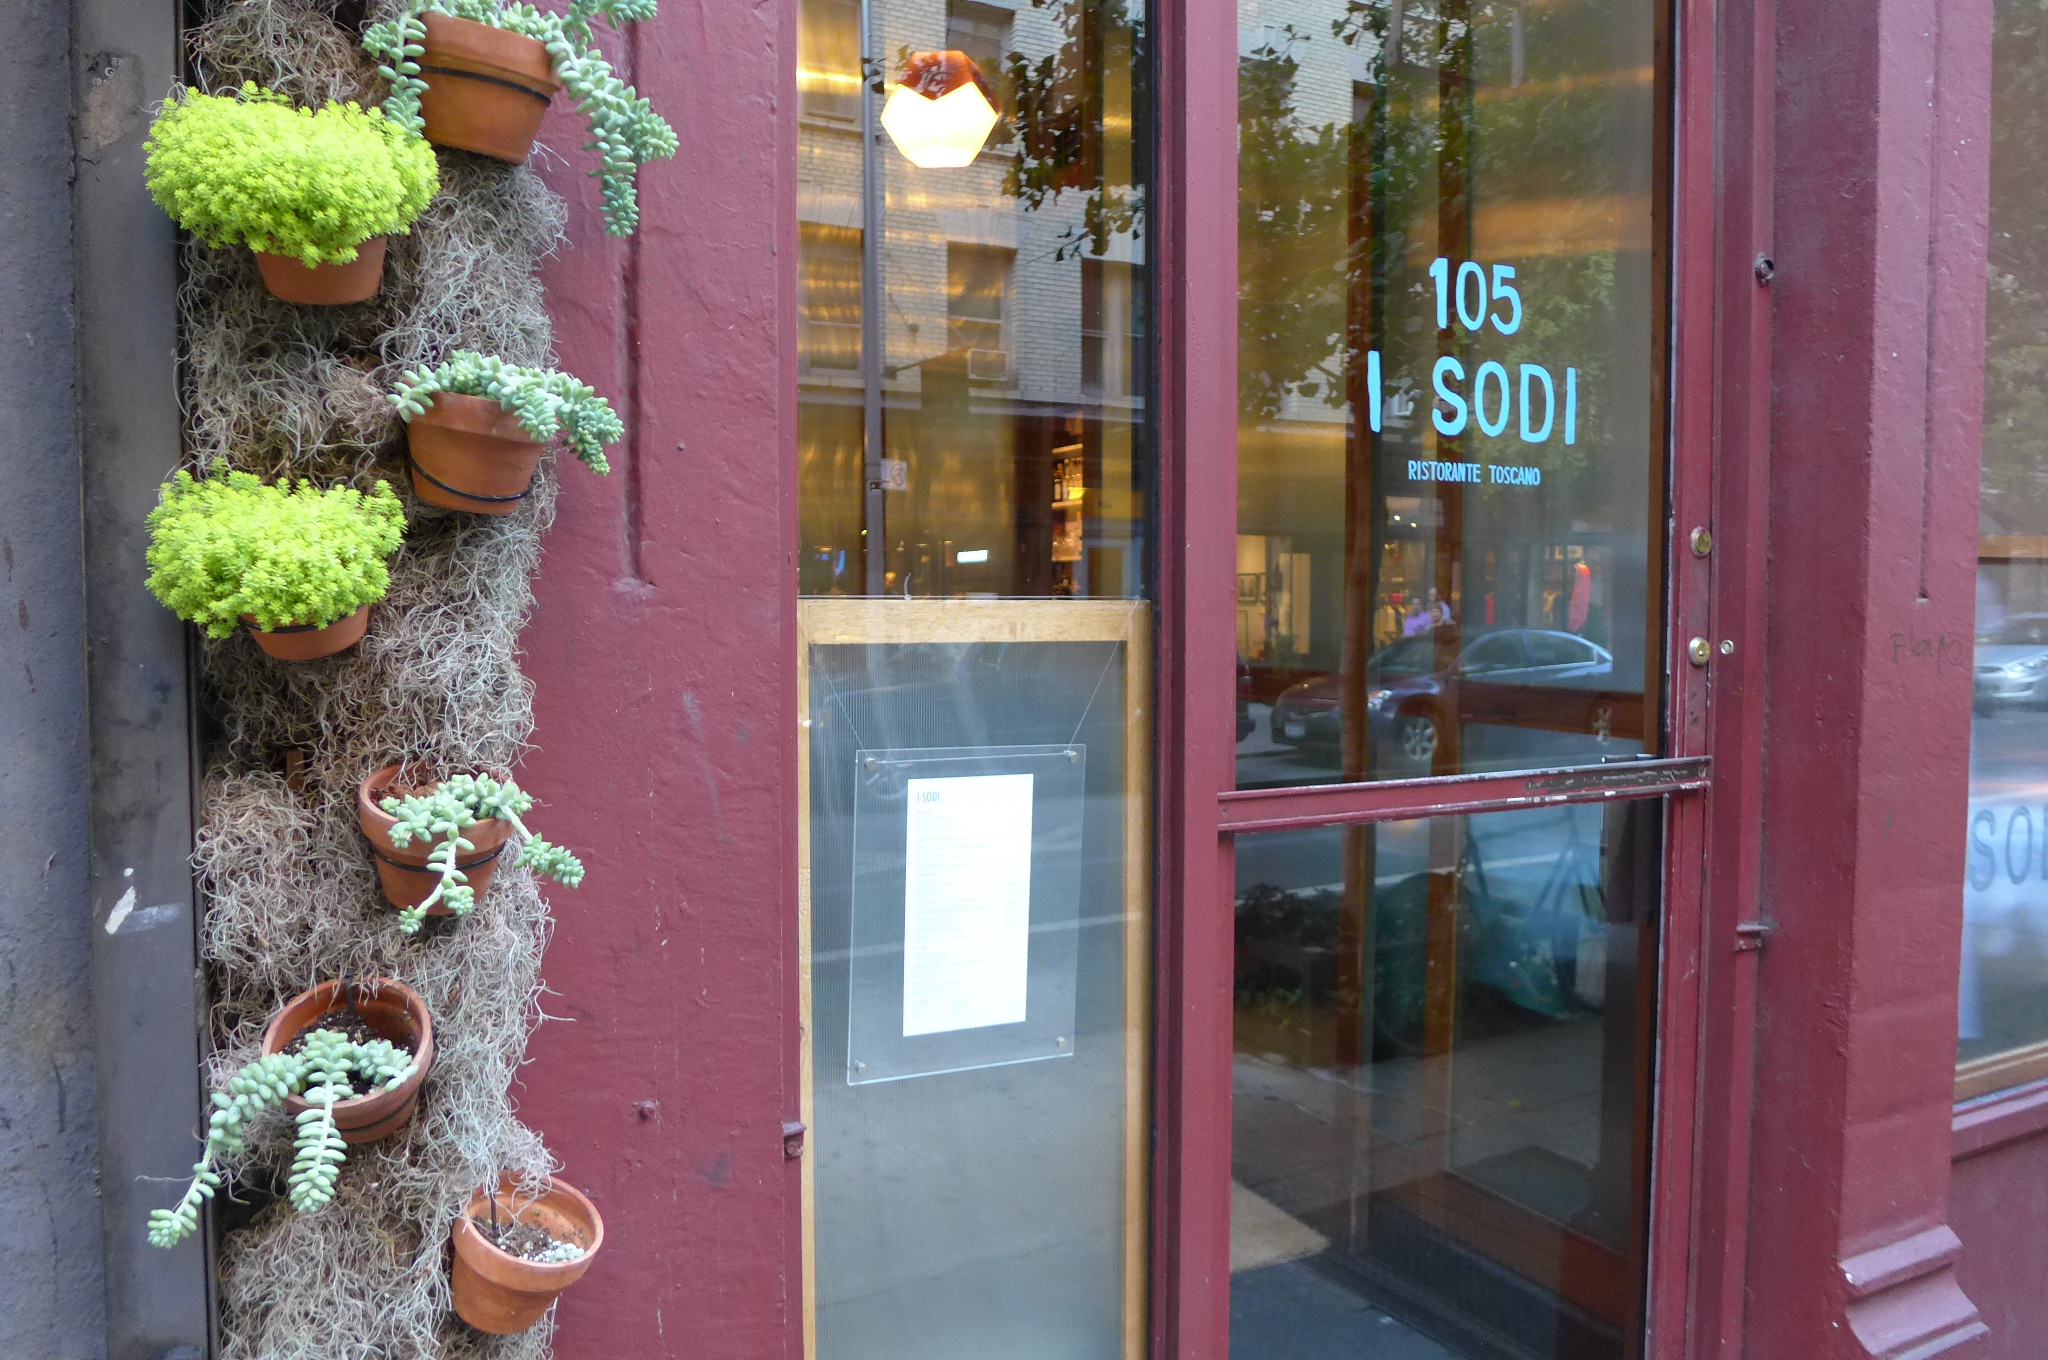 A very plain facade with a glass door and hanging column of potted succulent plants.